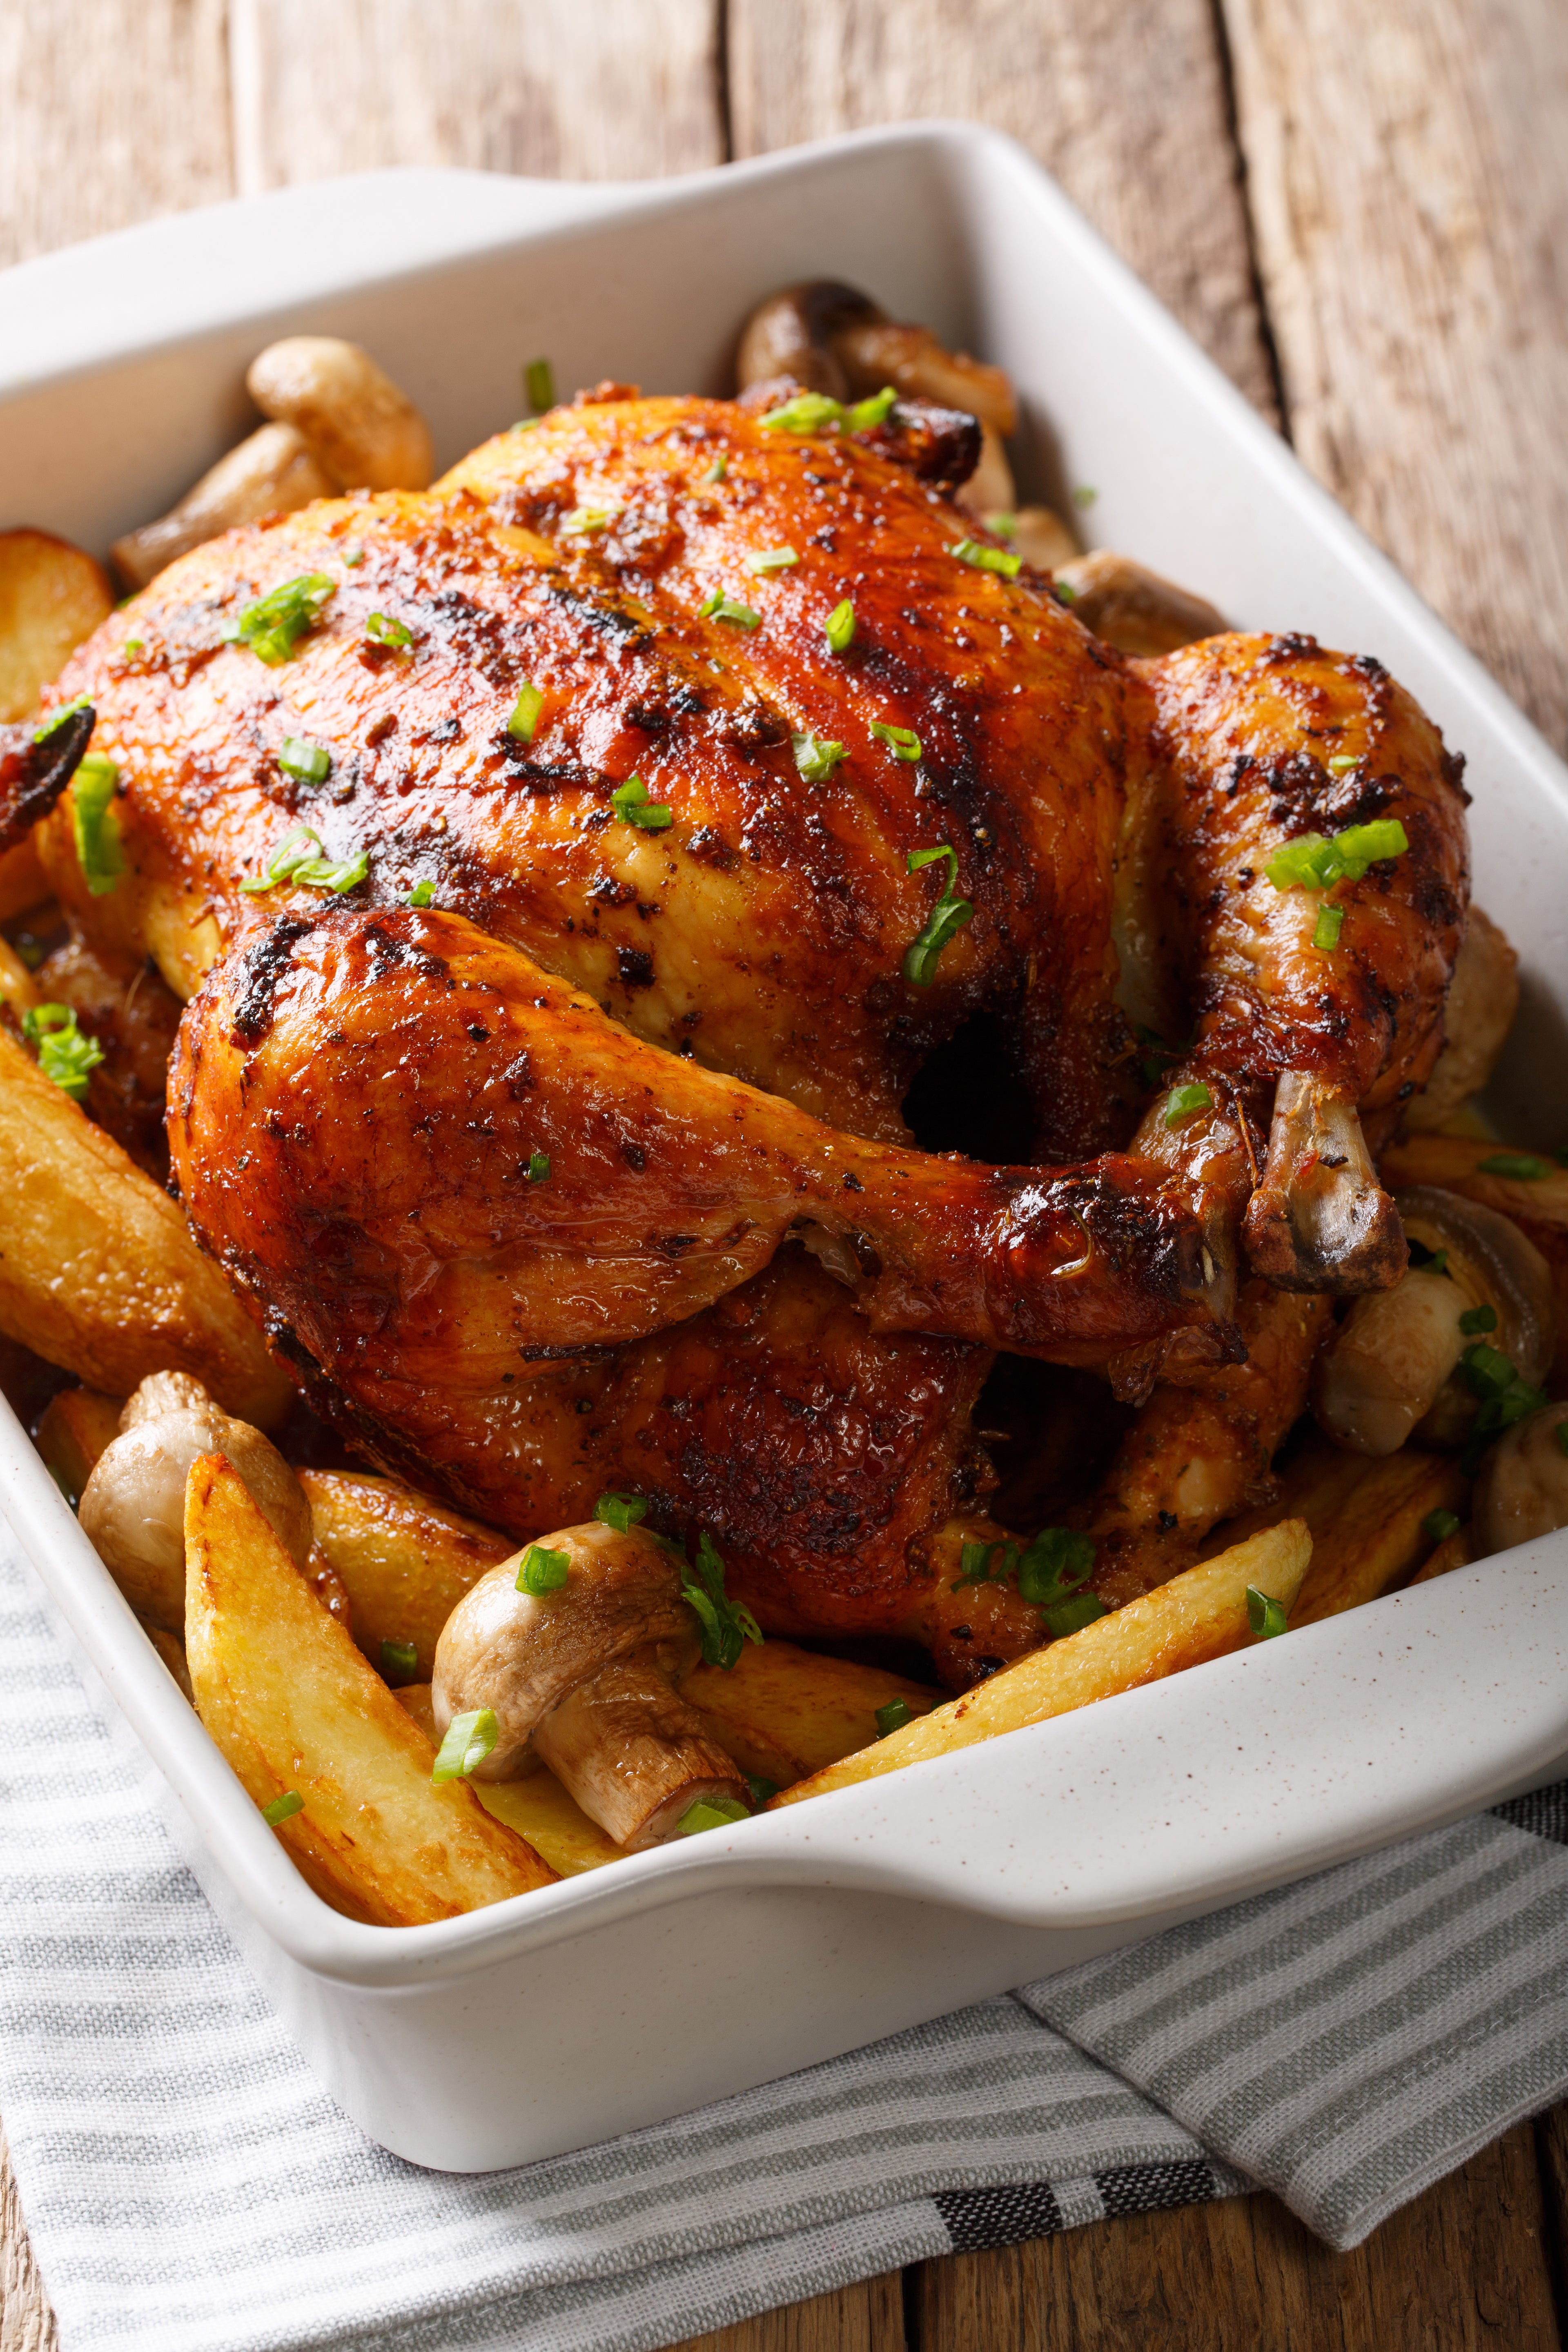 Roast the chicken over wedges of potato so thatthe drippings infuse the potatoes with incredible flavour